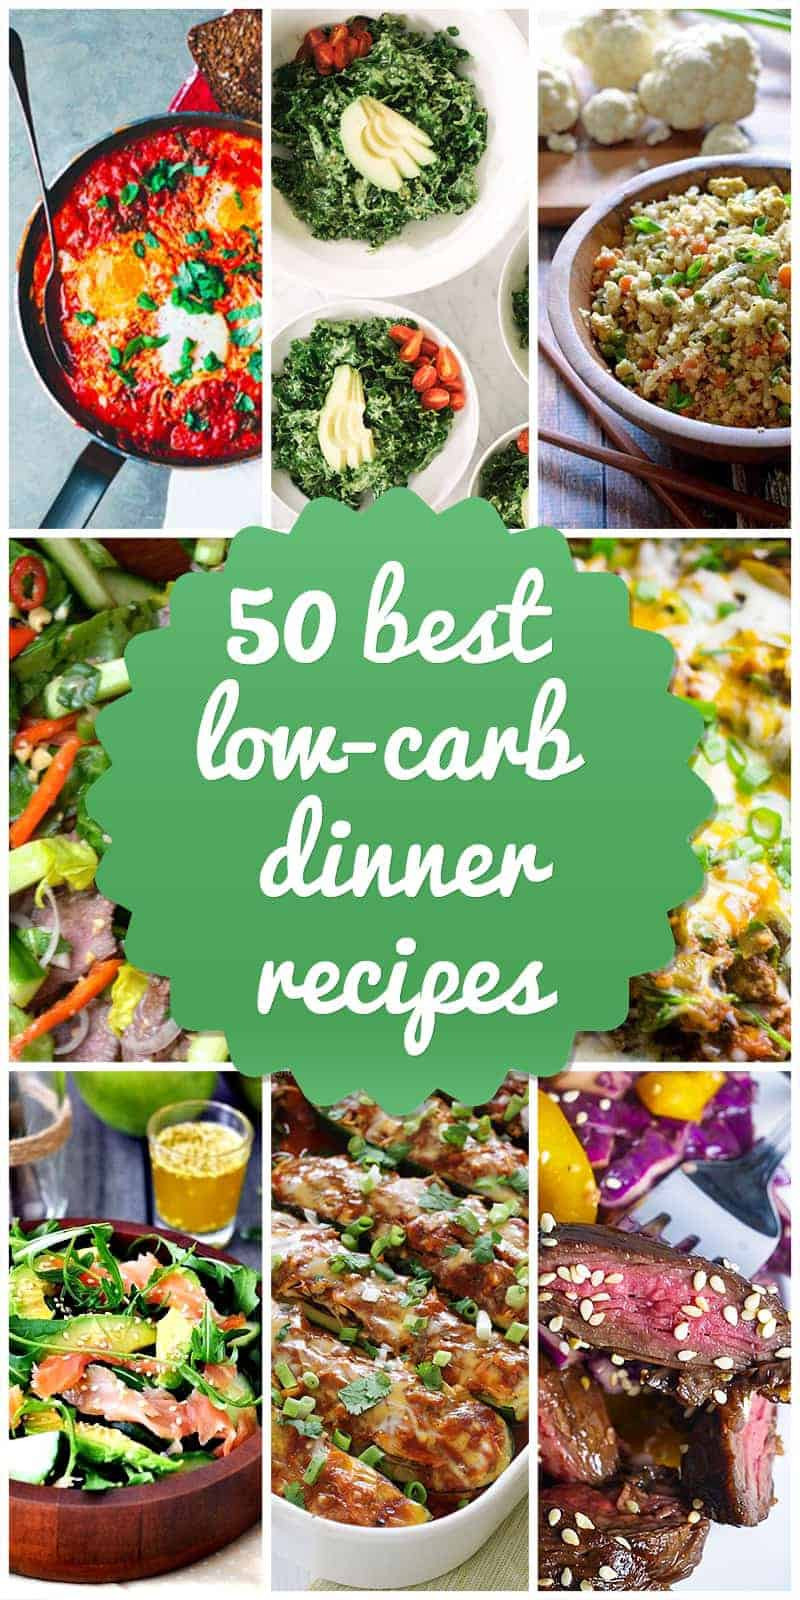 Low Carb Recipes For Dinner
 50 Best Low Carb Dinners Recipes and Ideas